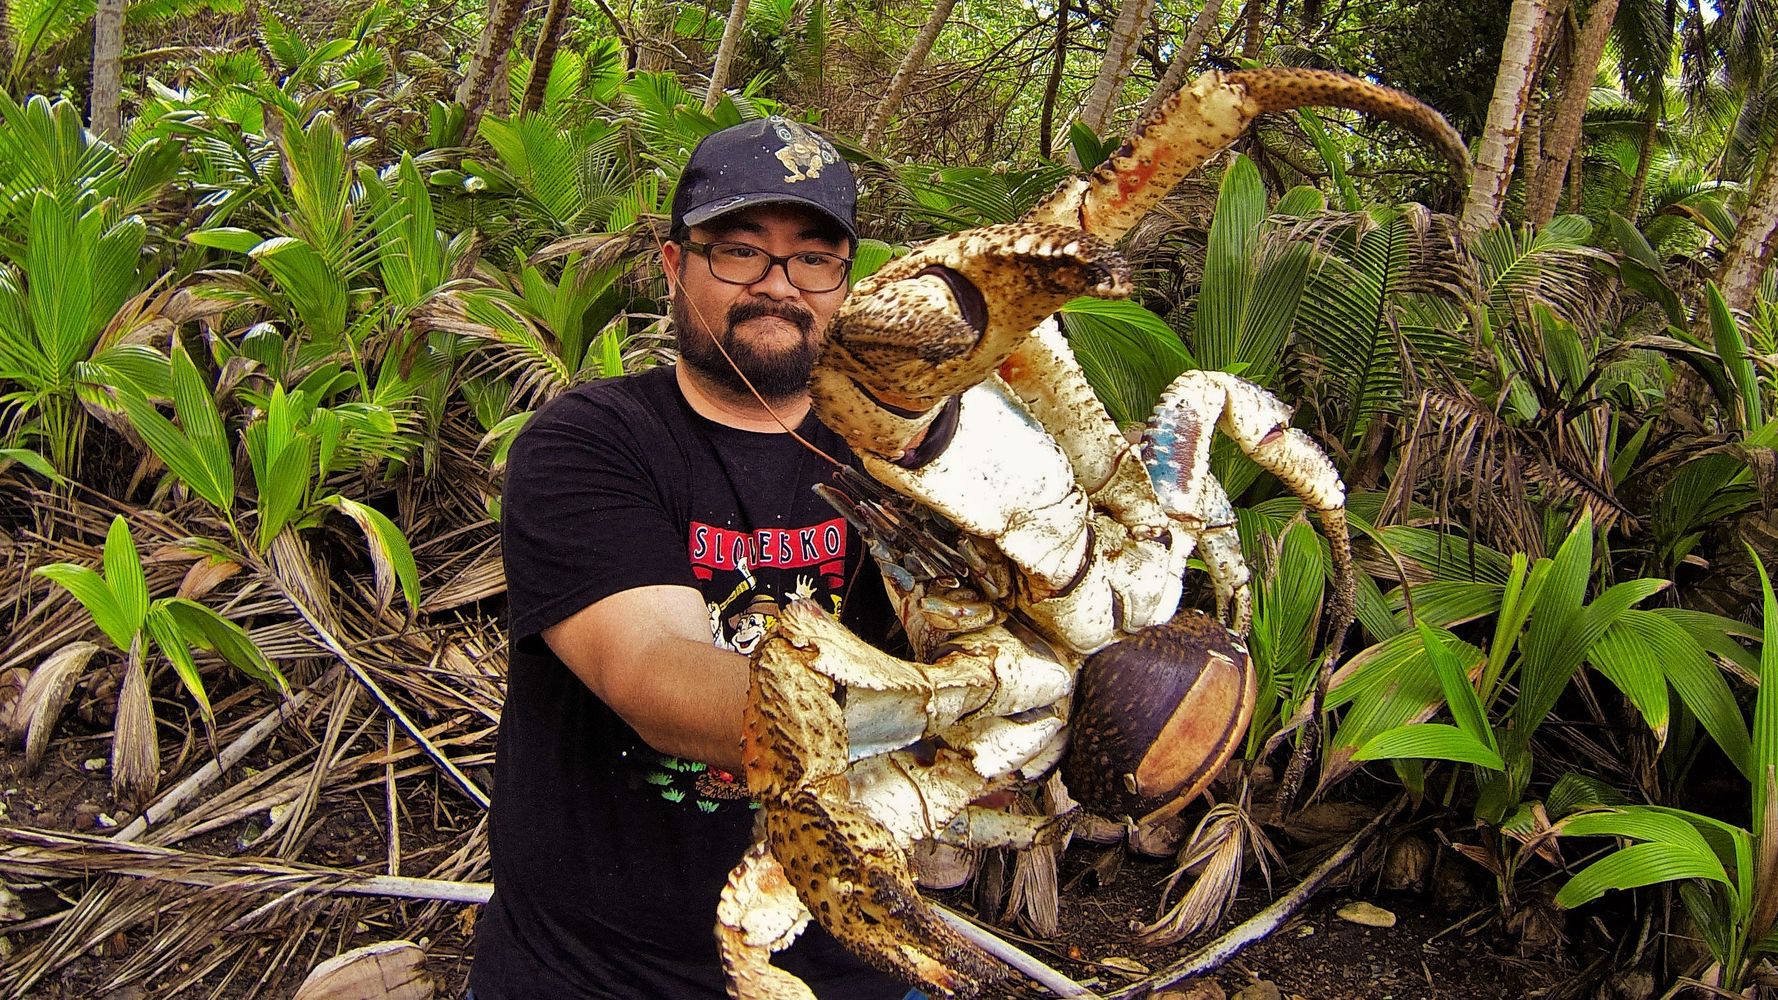 Holy Crab! Fearless Australian With Massive Coconut Crab | HuffPost null